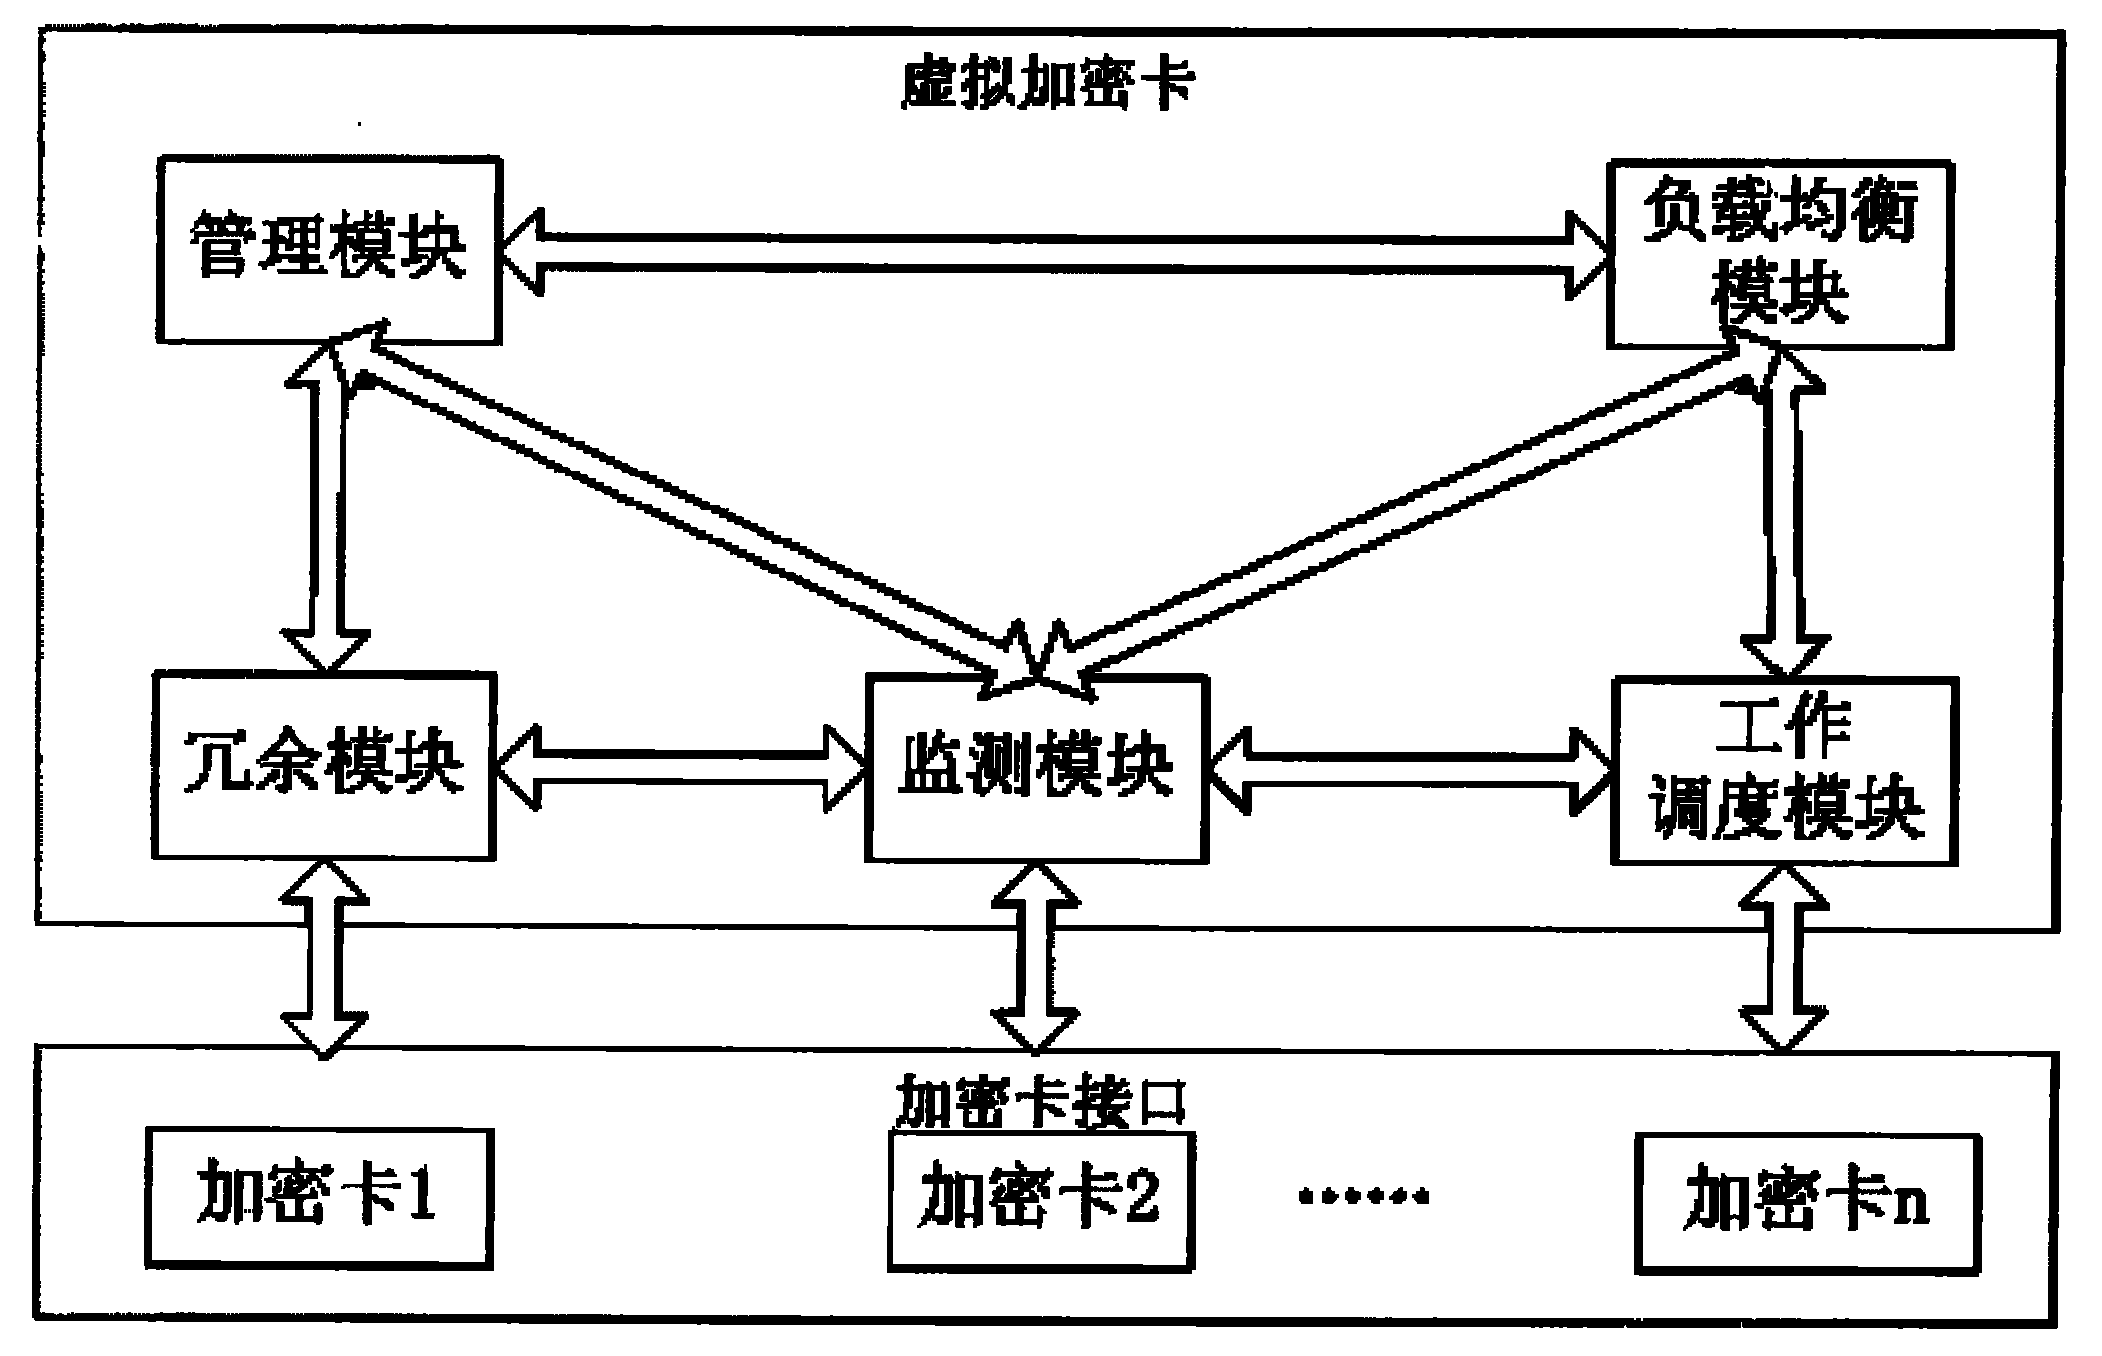 Virtual device based on multiple encryption cards